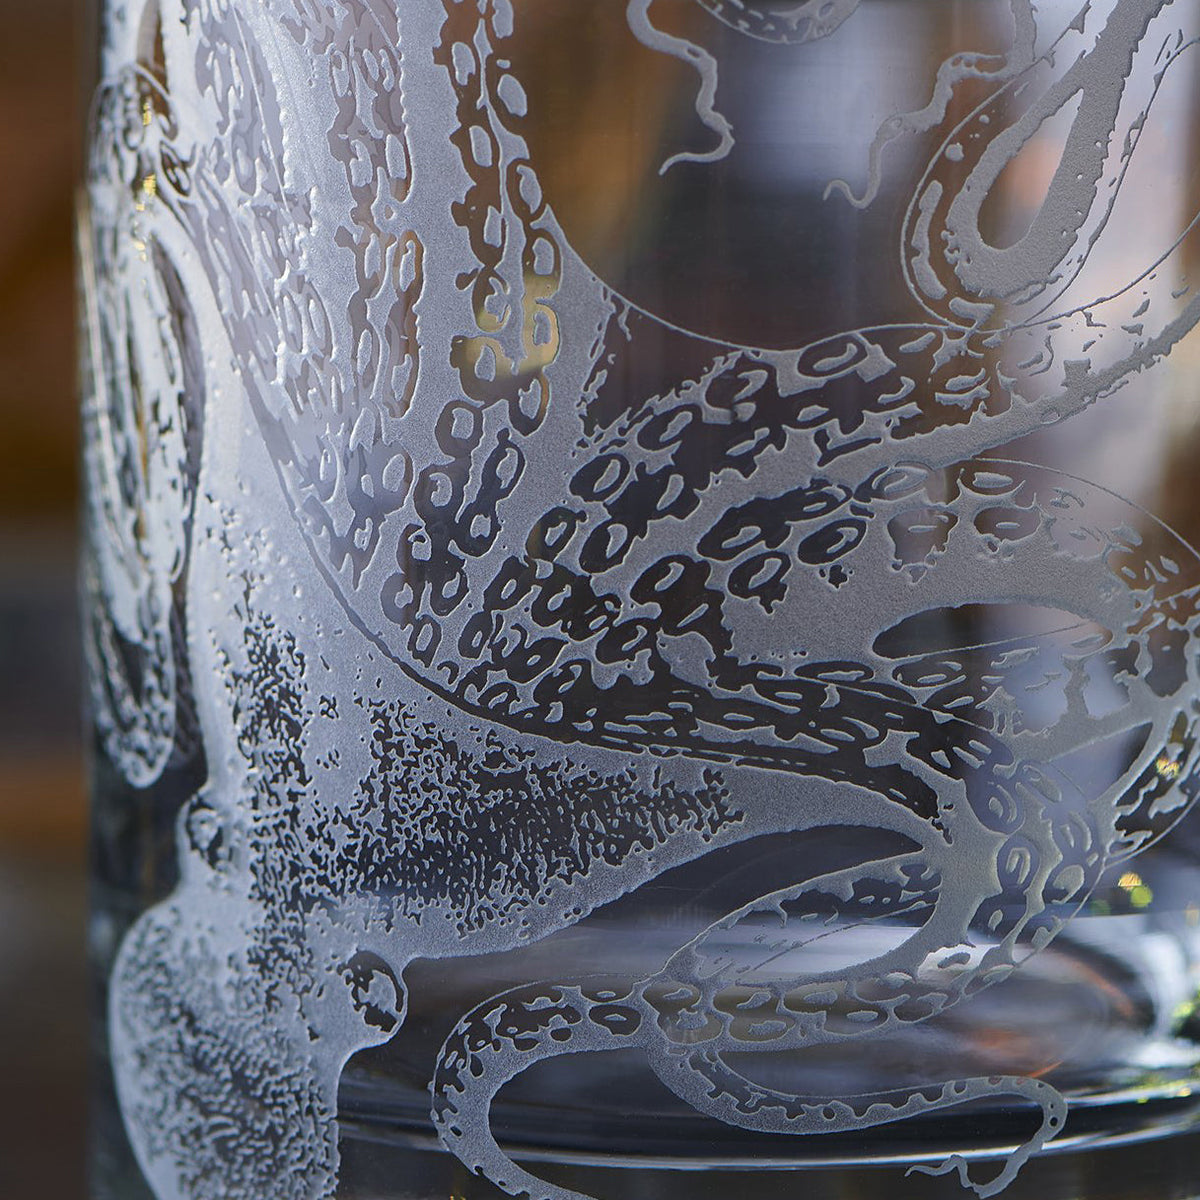 A hand-etched Lucy Short Drink Glass featuring Lucy the octopus by Caskata Artisanal Home.